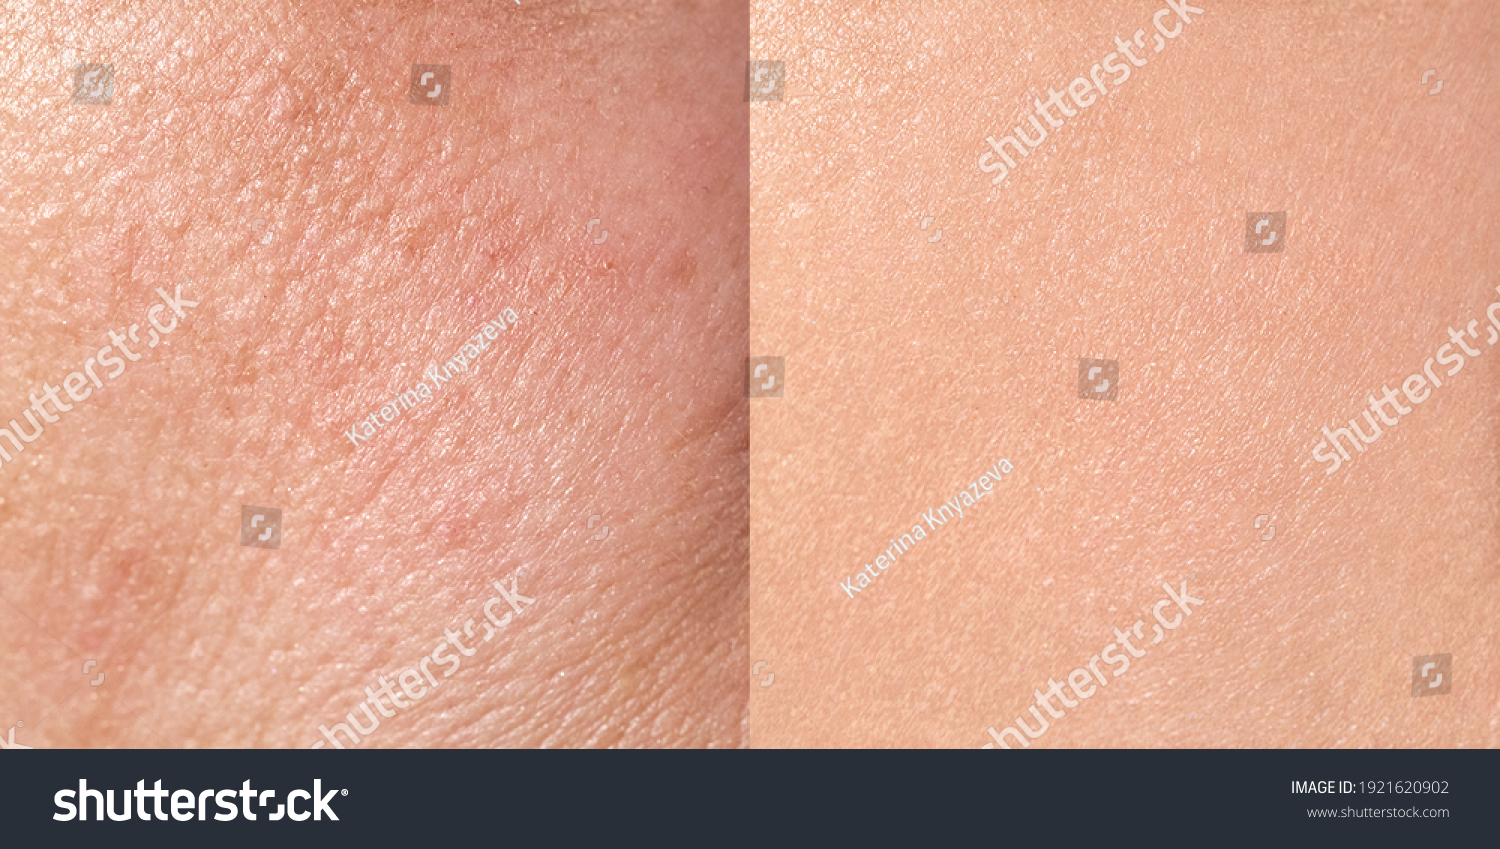 Skin before and after treatment, close-up, square format, horizontal #1921620902